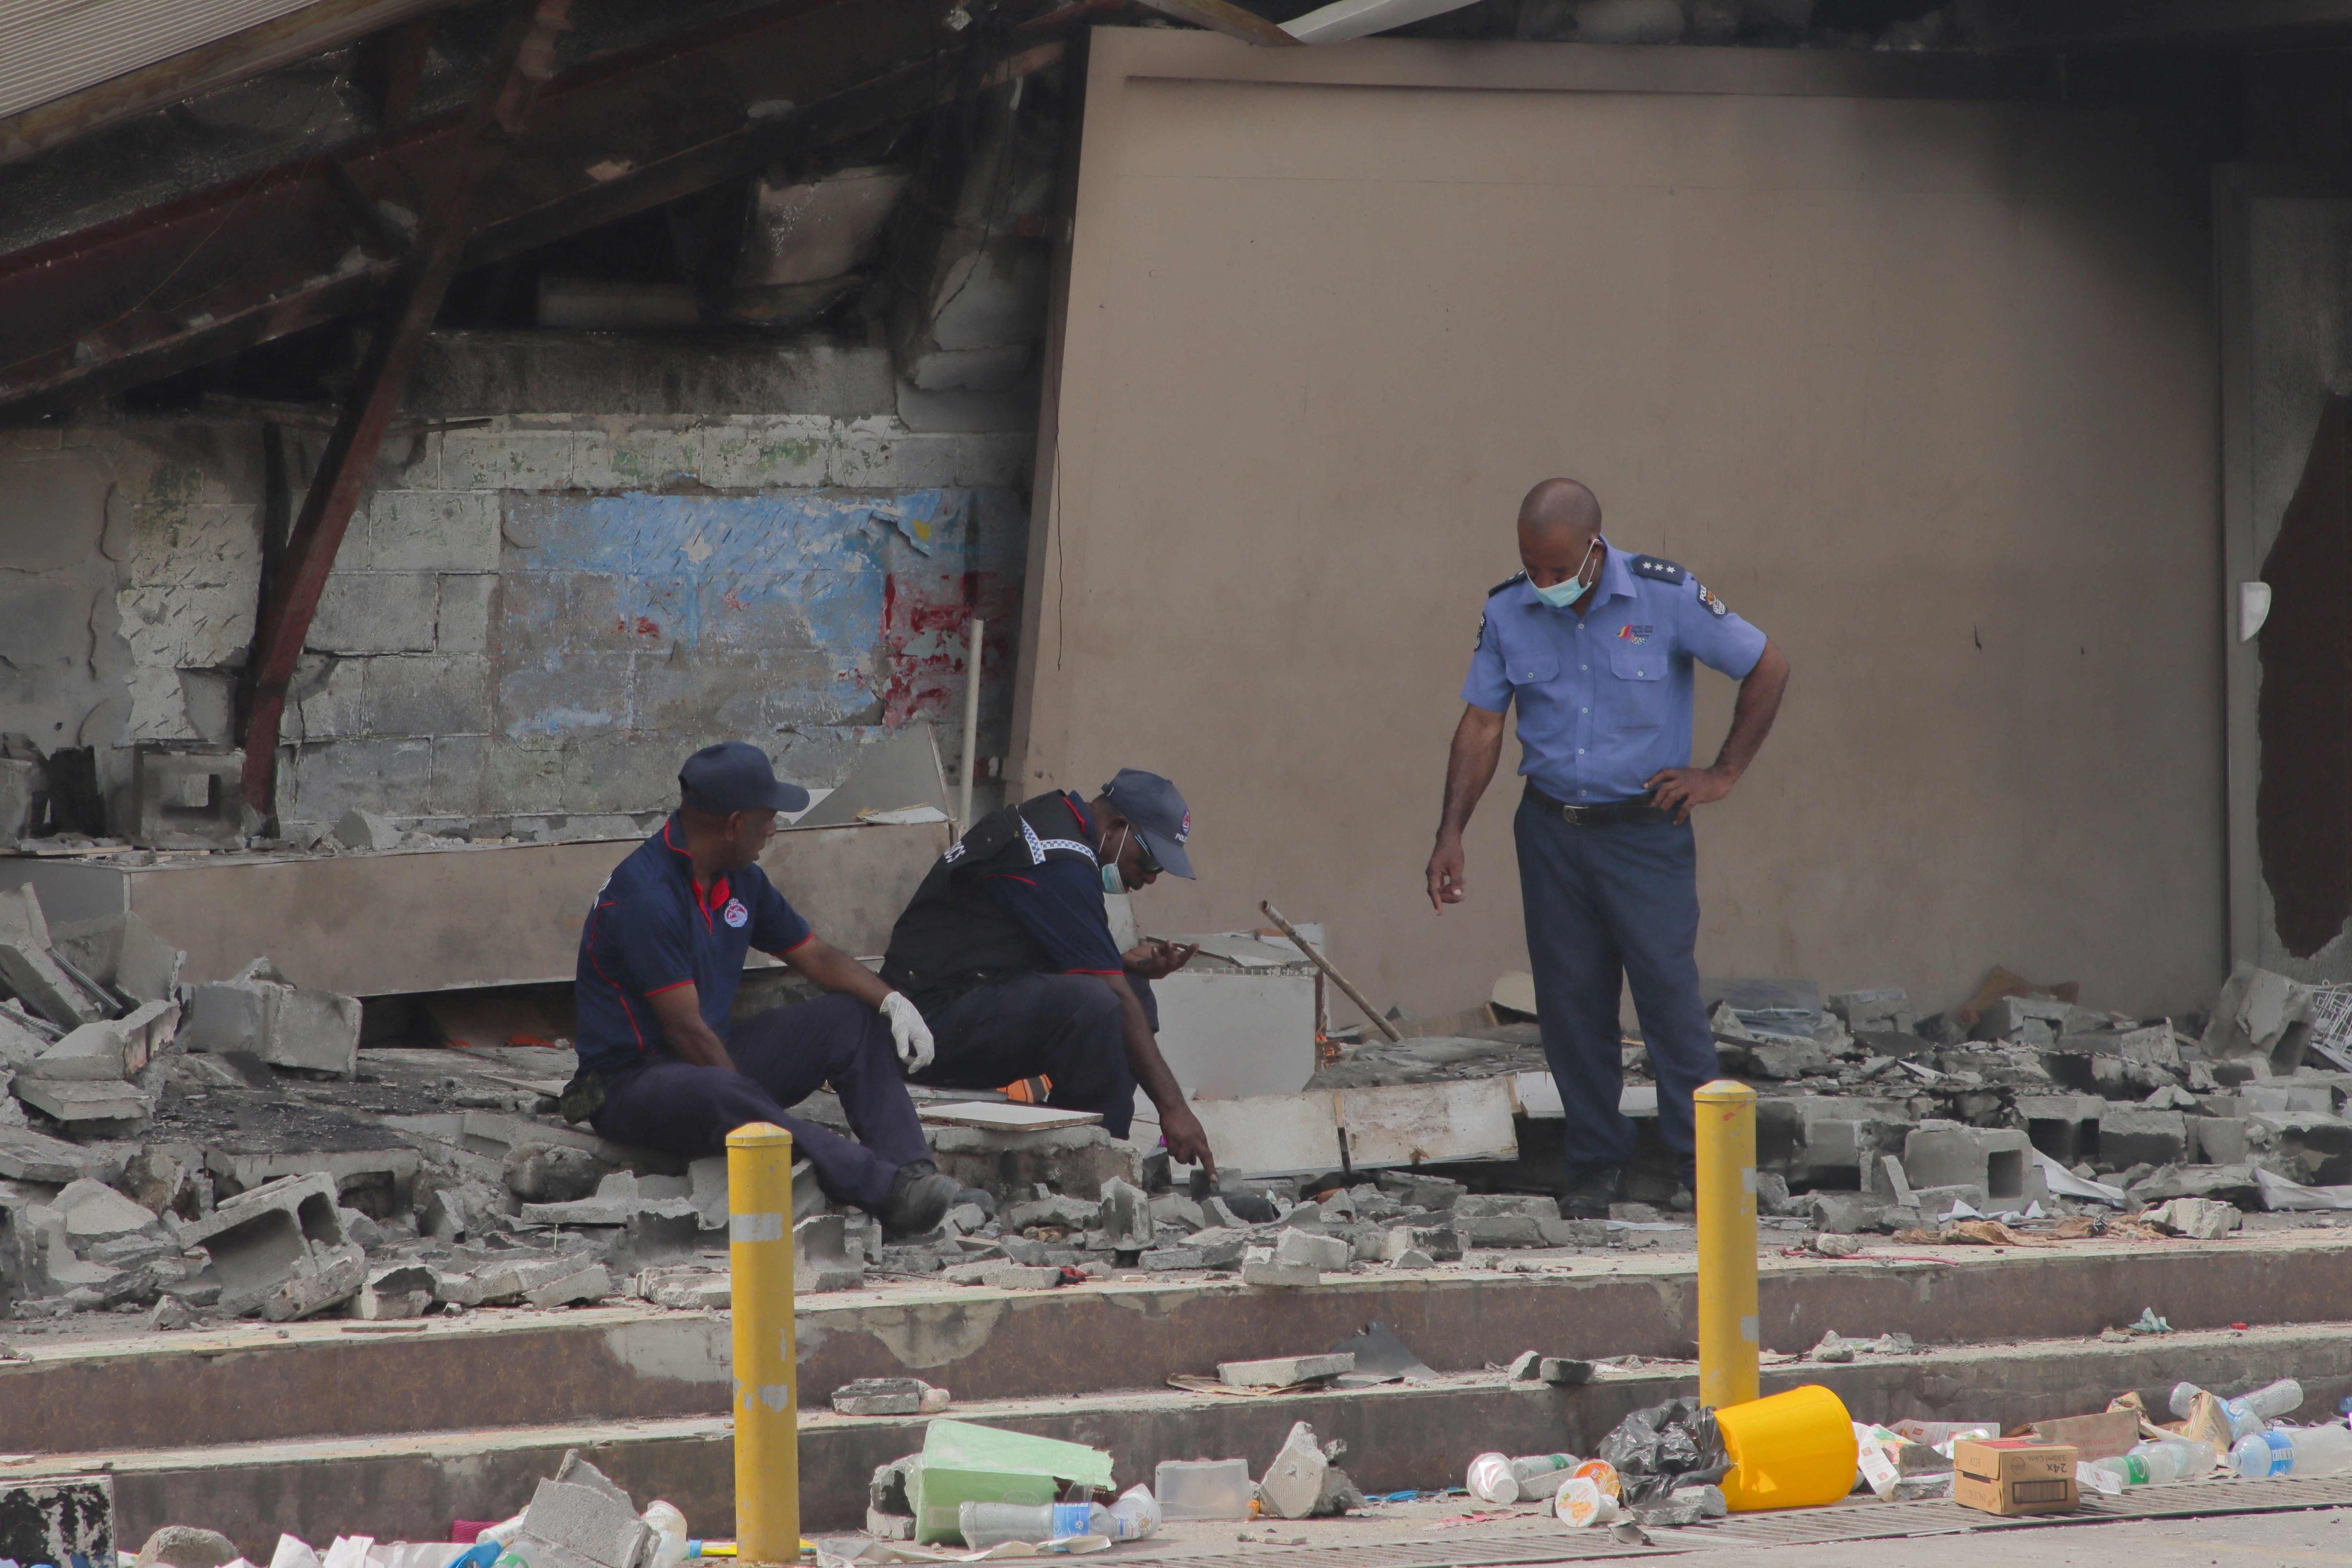 Police work at the site of a damaged building in Port Moresby on January 12. Deadly riots in Papua New Guinea laid bare the impoverished nation’s growing reliance on private security firms in place of police. Photo: AFP